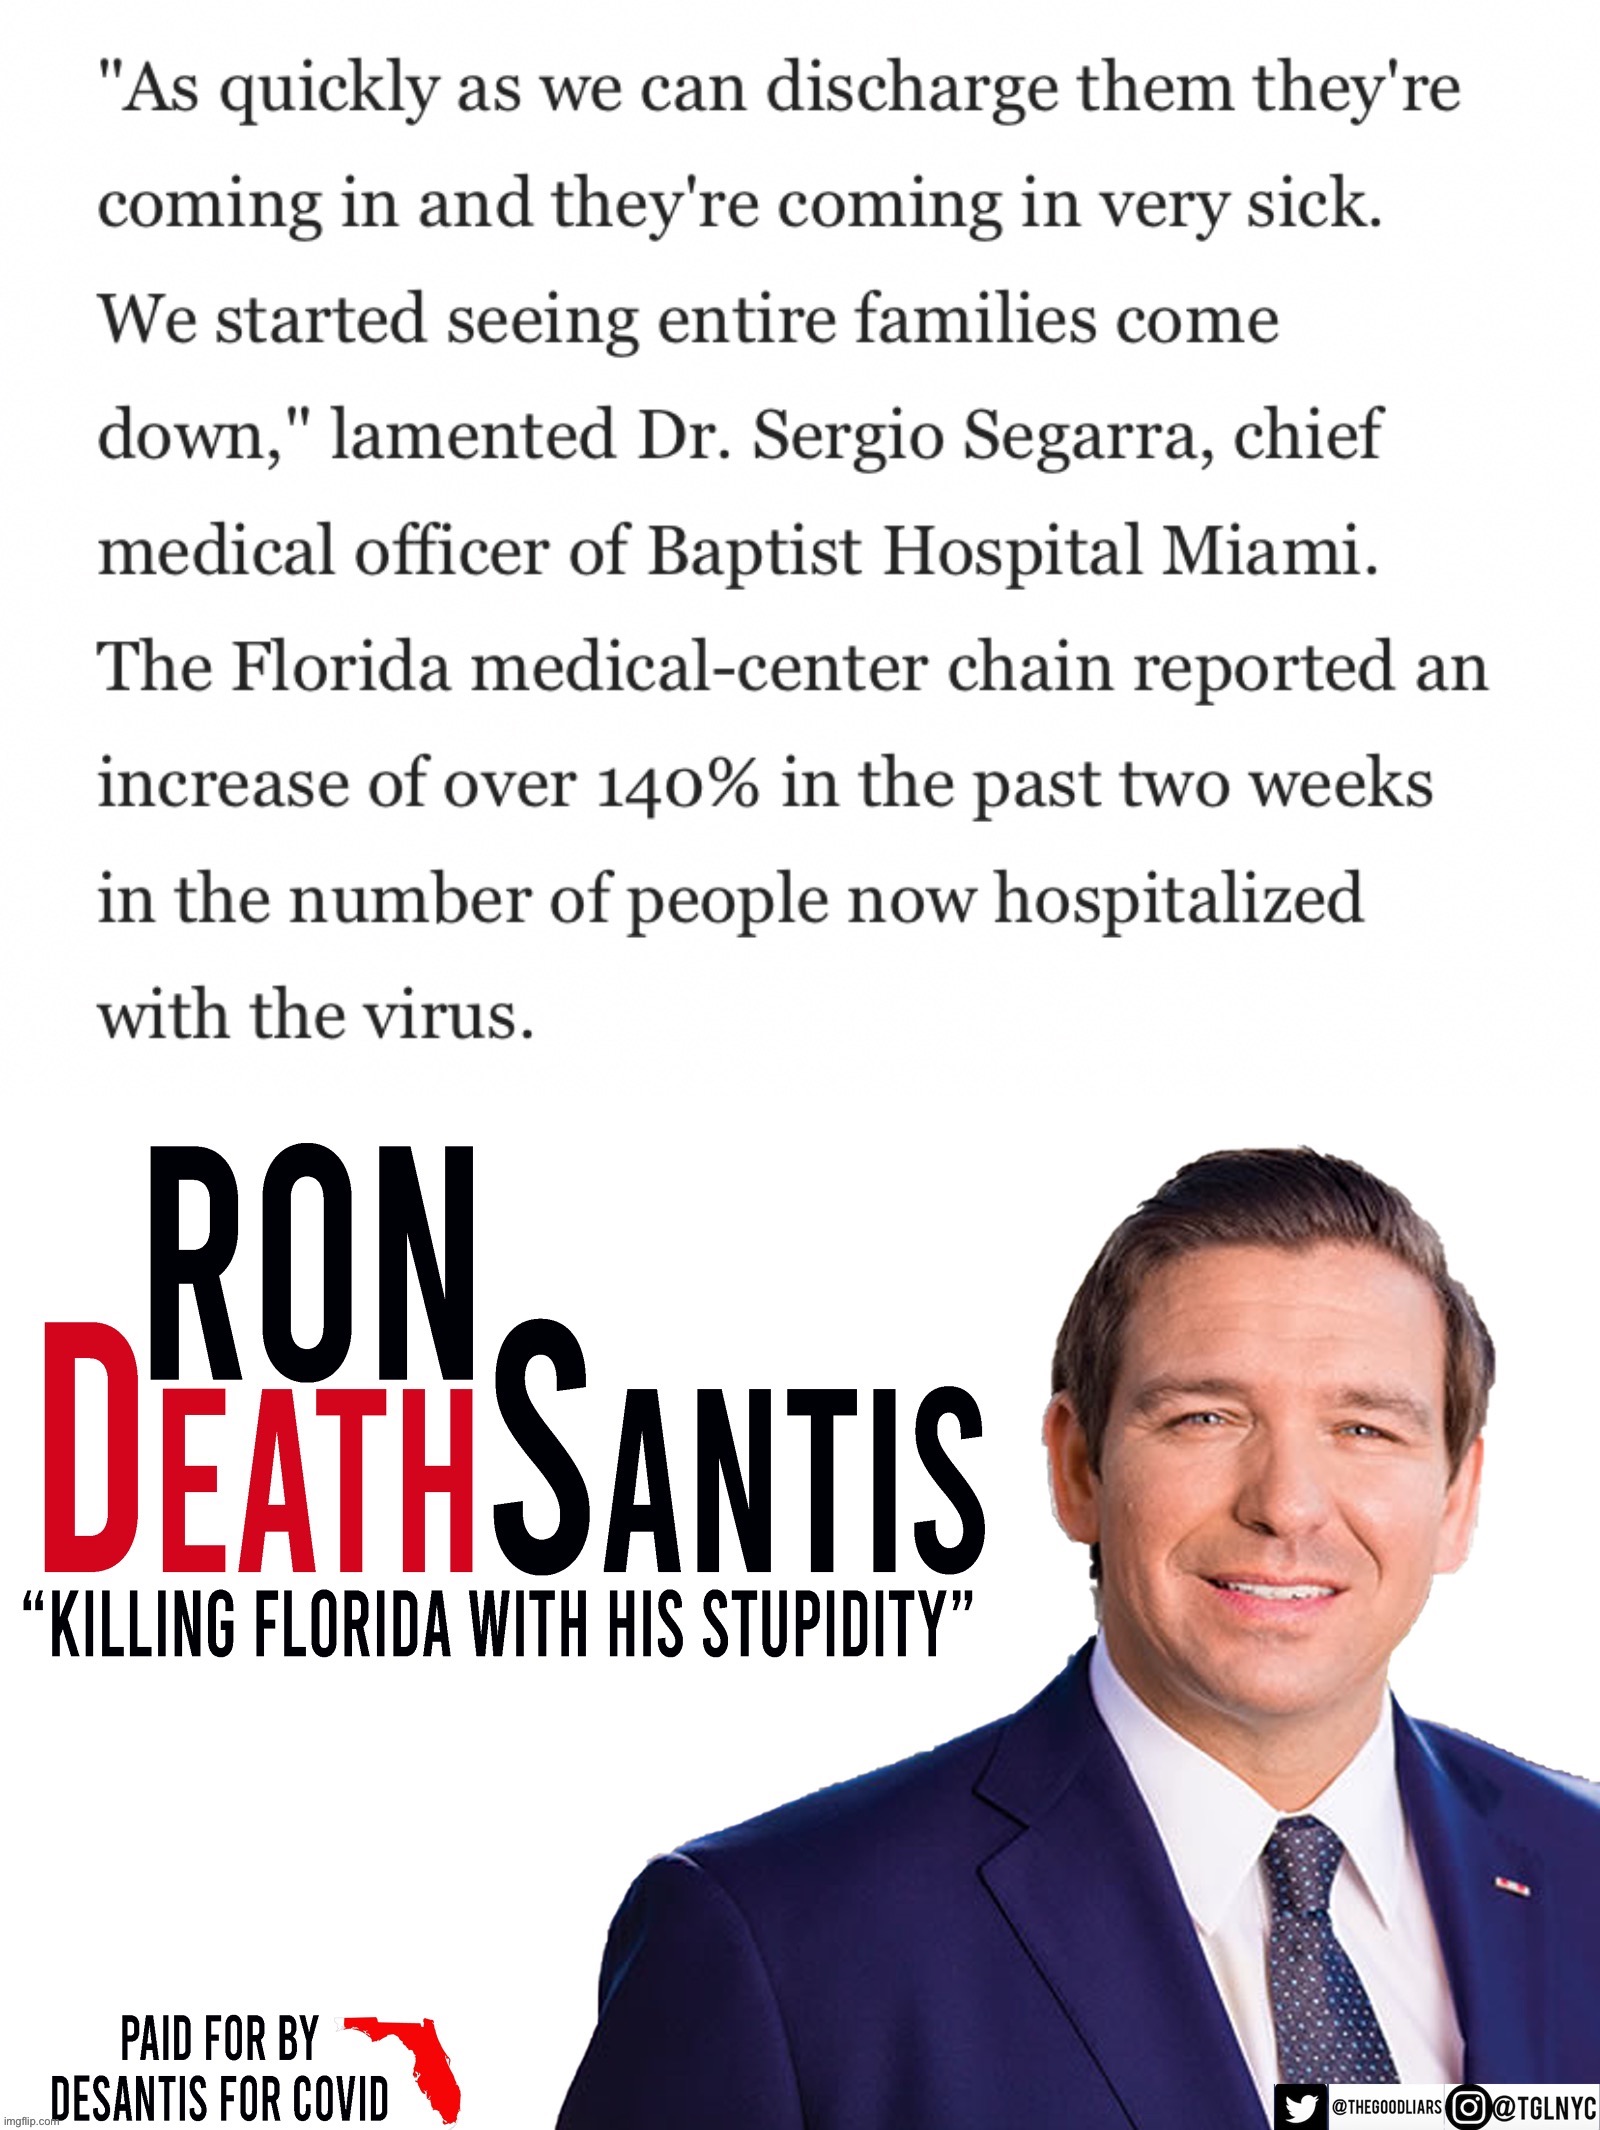 Meanwhile in Florida… | image tagged in rondeathsantis,ron desantis,florida,covid-19,coronavirus,meanwhile in florida | made w/ Imgflip meme maker